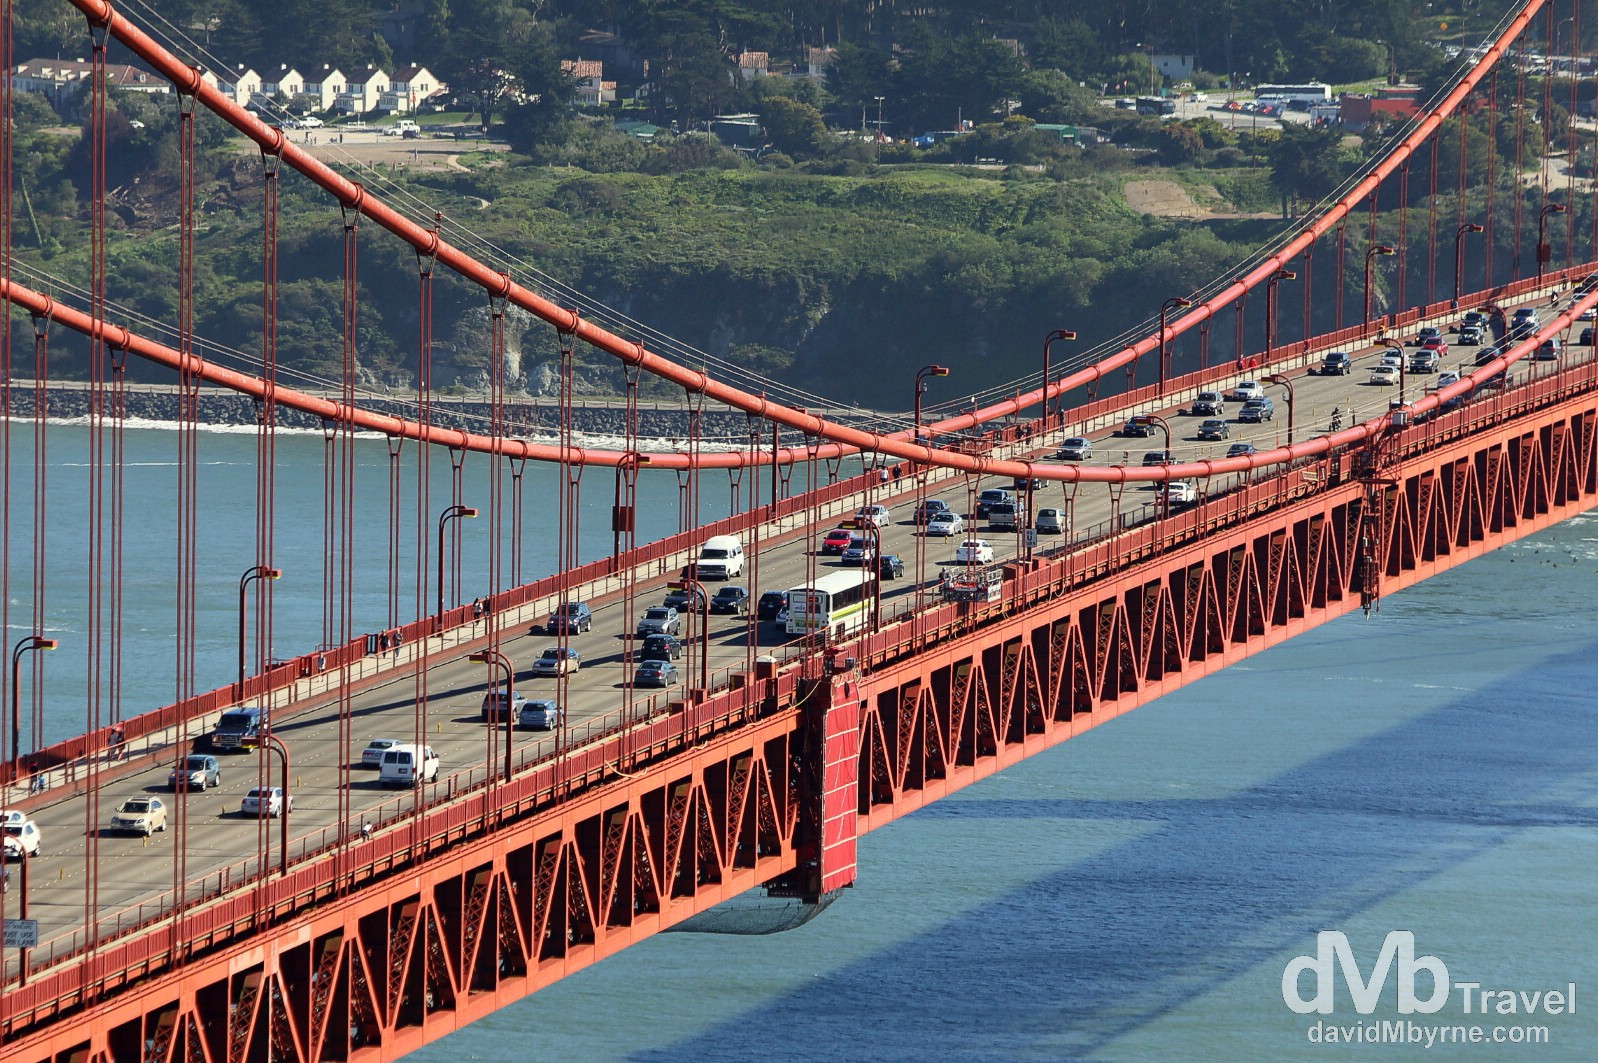 Traffic on the central span of the Golden Gate Bridge as seen from Battery Spencer, Marin Headlands, San Francisco, California, USA. April 9th 2013.